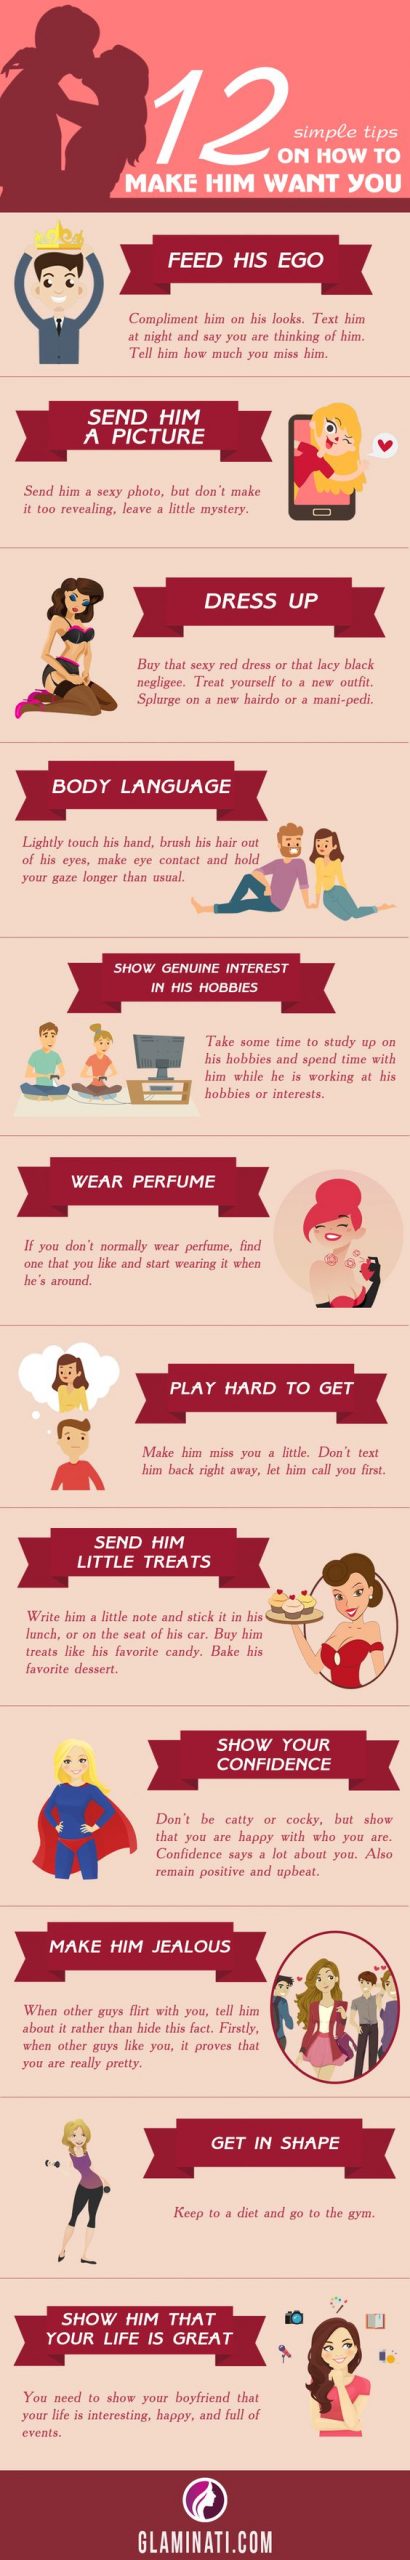 Tips On How To Make Him Want You - Infographic